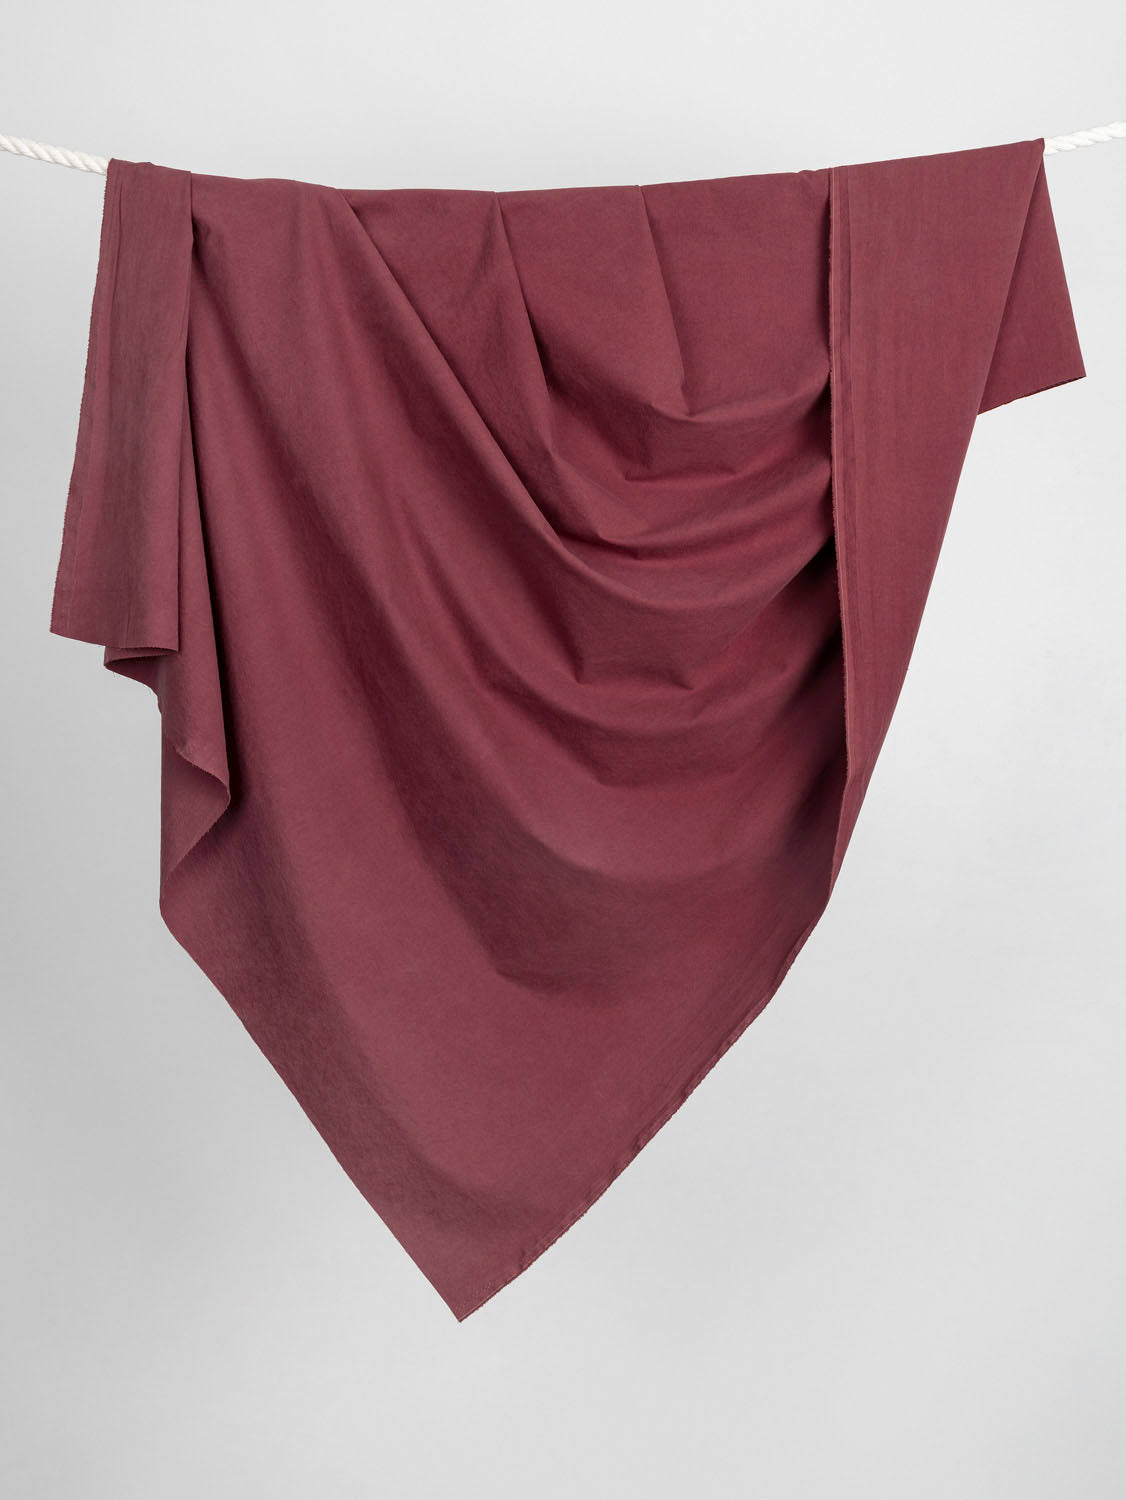 Substantial Organic Cotton Broadcloth - Mineral Red | Core Fabrics